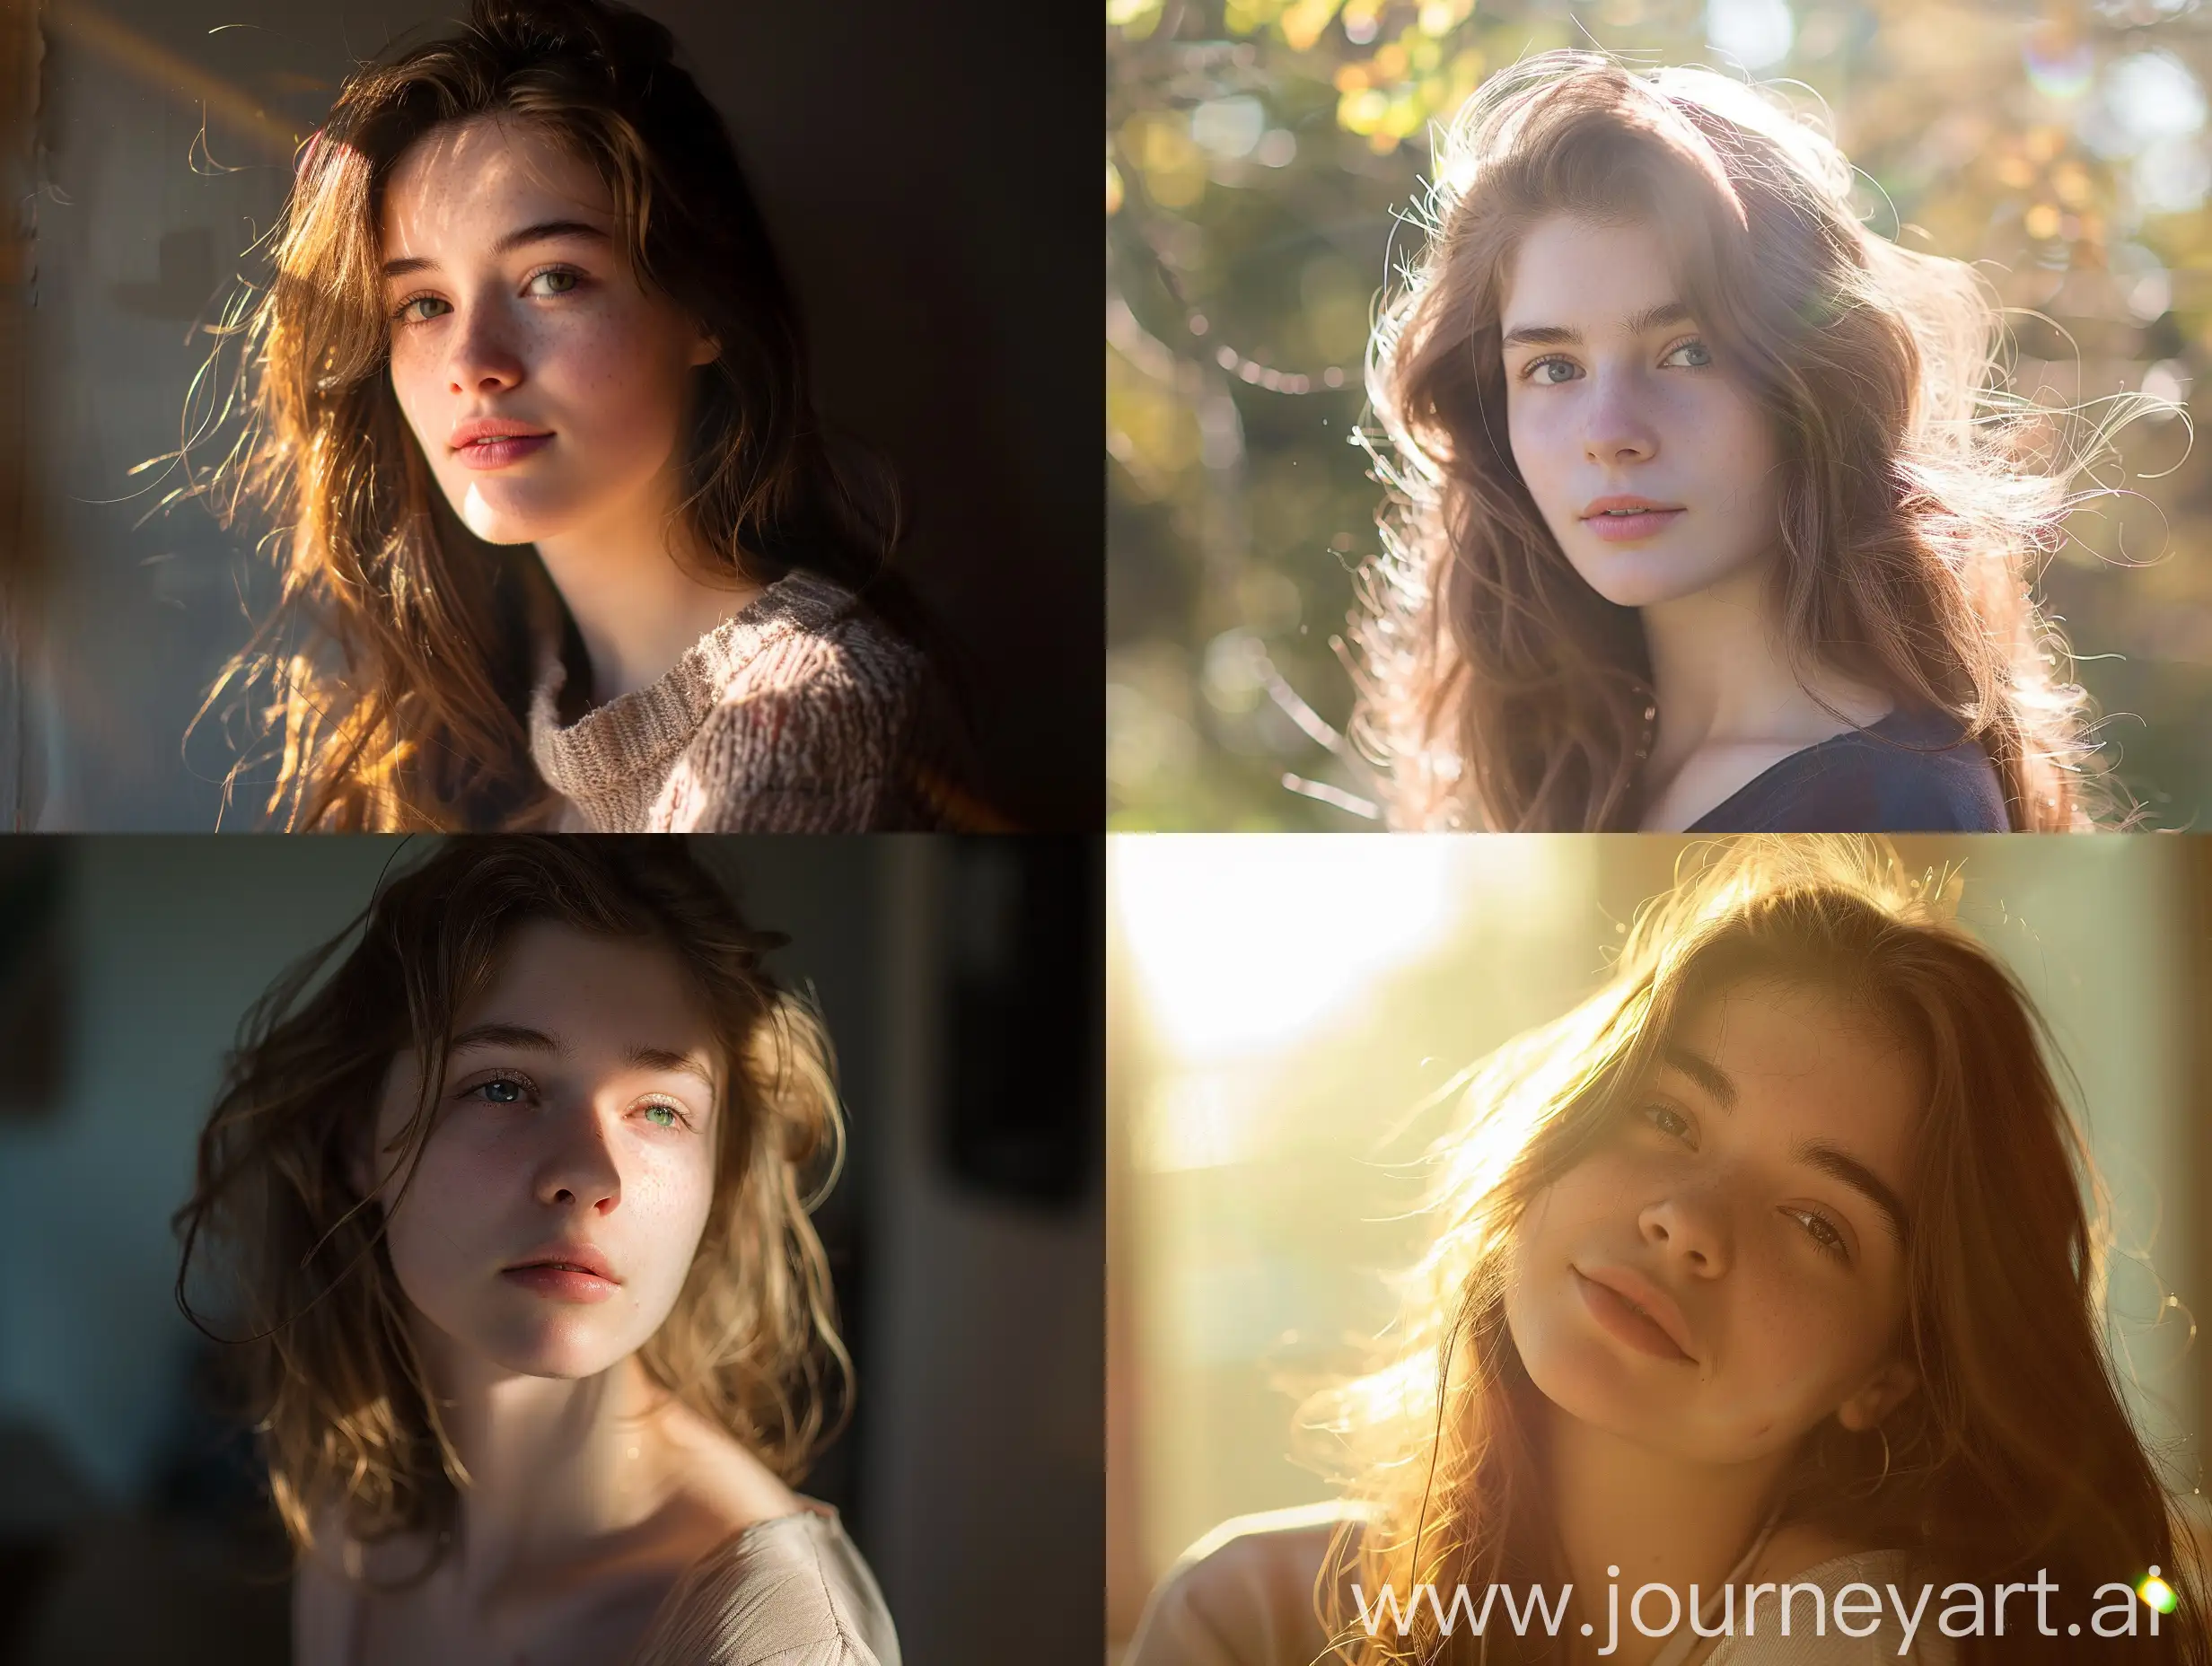 Portrait photography of a young woman, candid photo, dreamlike lighting, sunlight shining through in her hair, 85mm, f 1.2, --ar 4:3